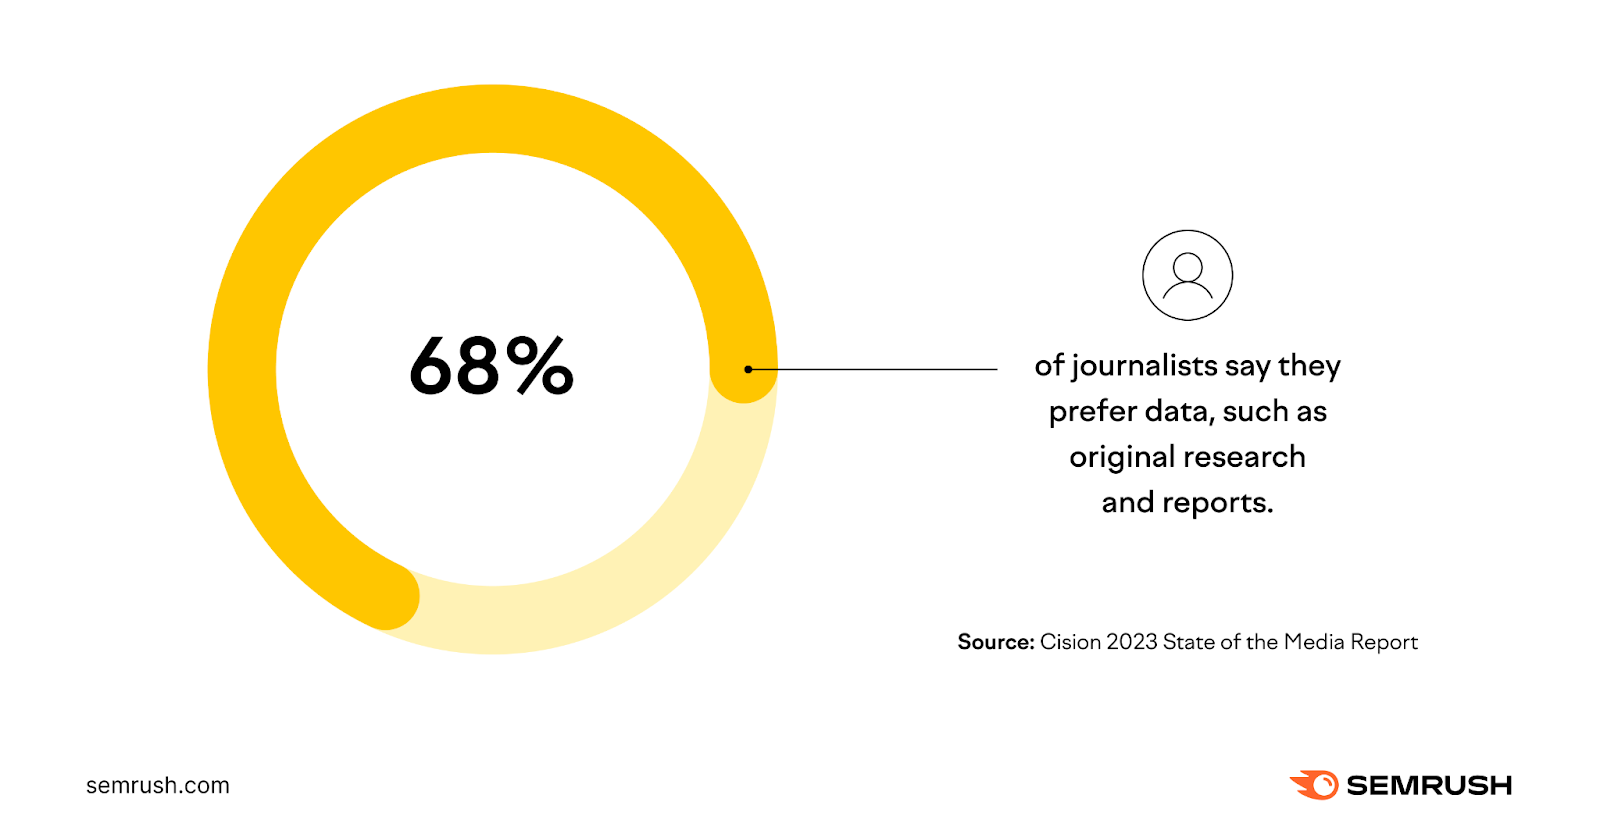 68% of journalists say they prefer data, such as original research and reports